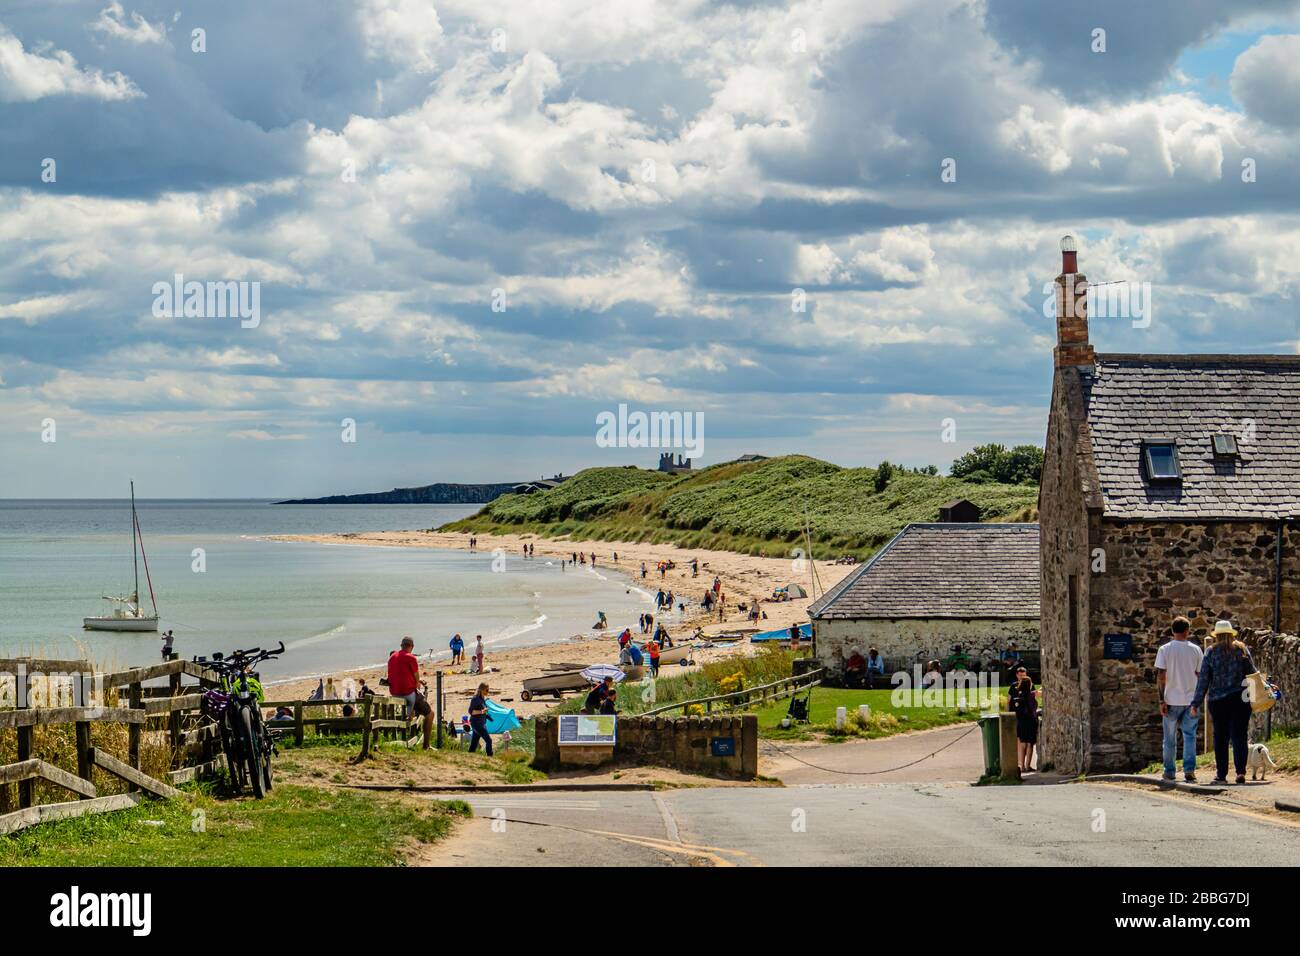 A summer's day on the beach at Low Newton-by-the-Sea, Northumberland, UK. August 2018. Stock Photo